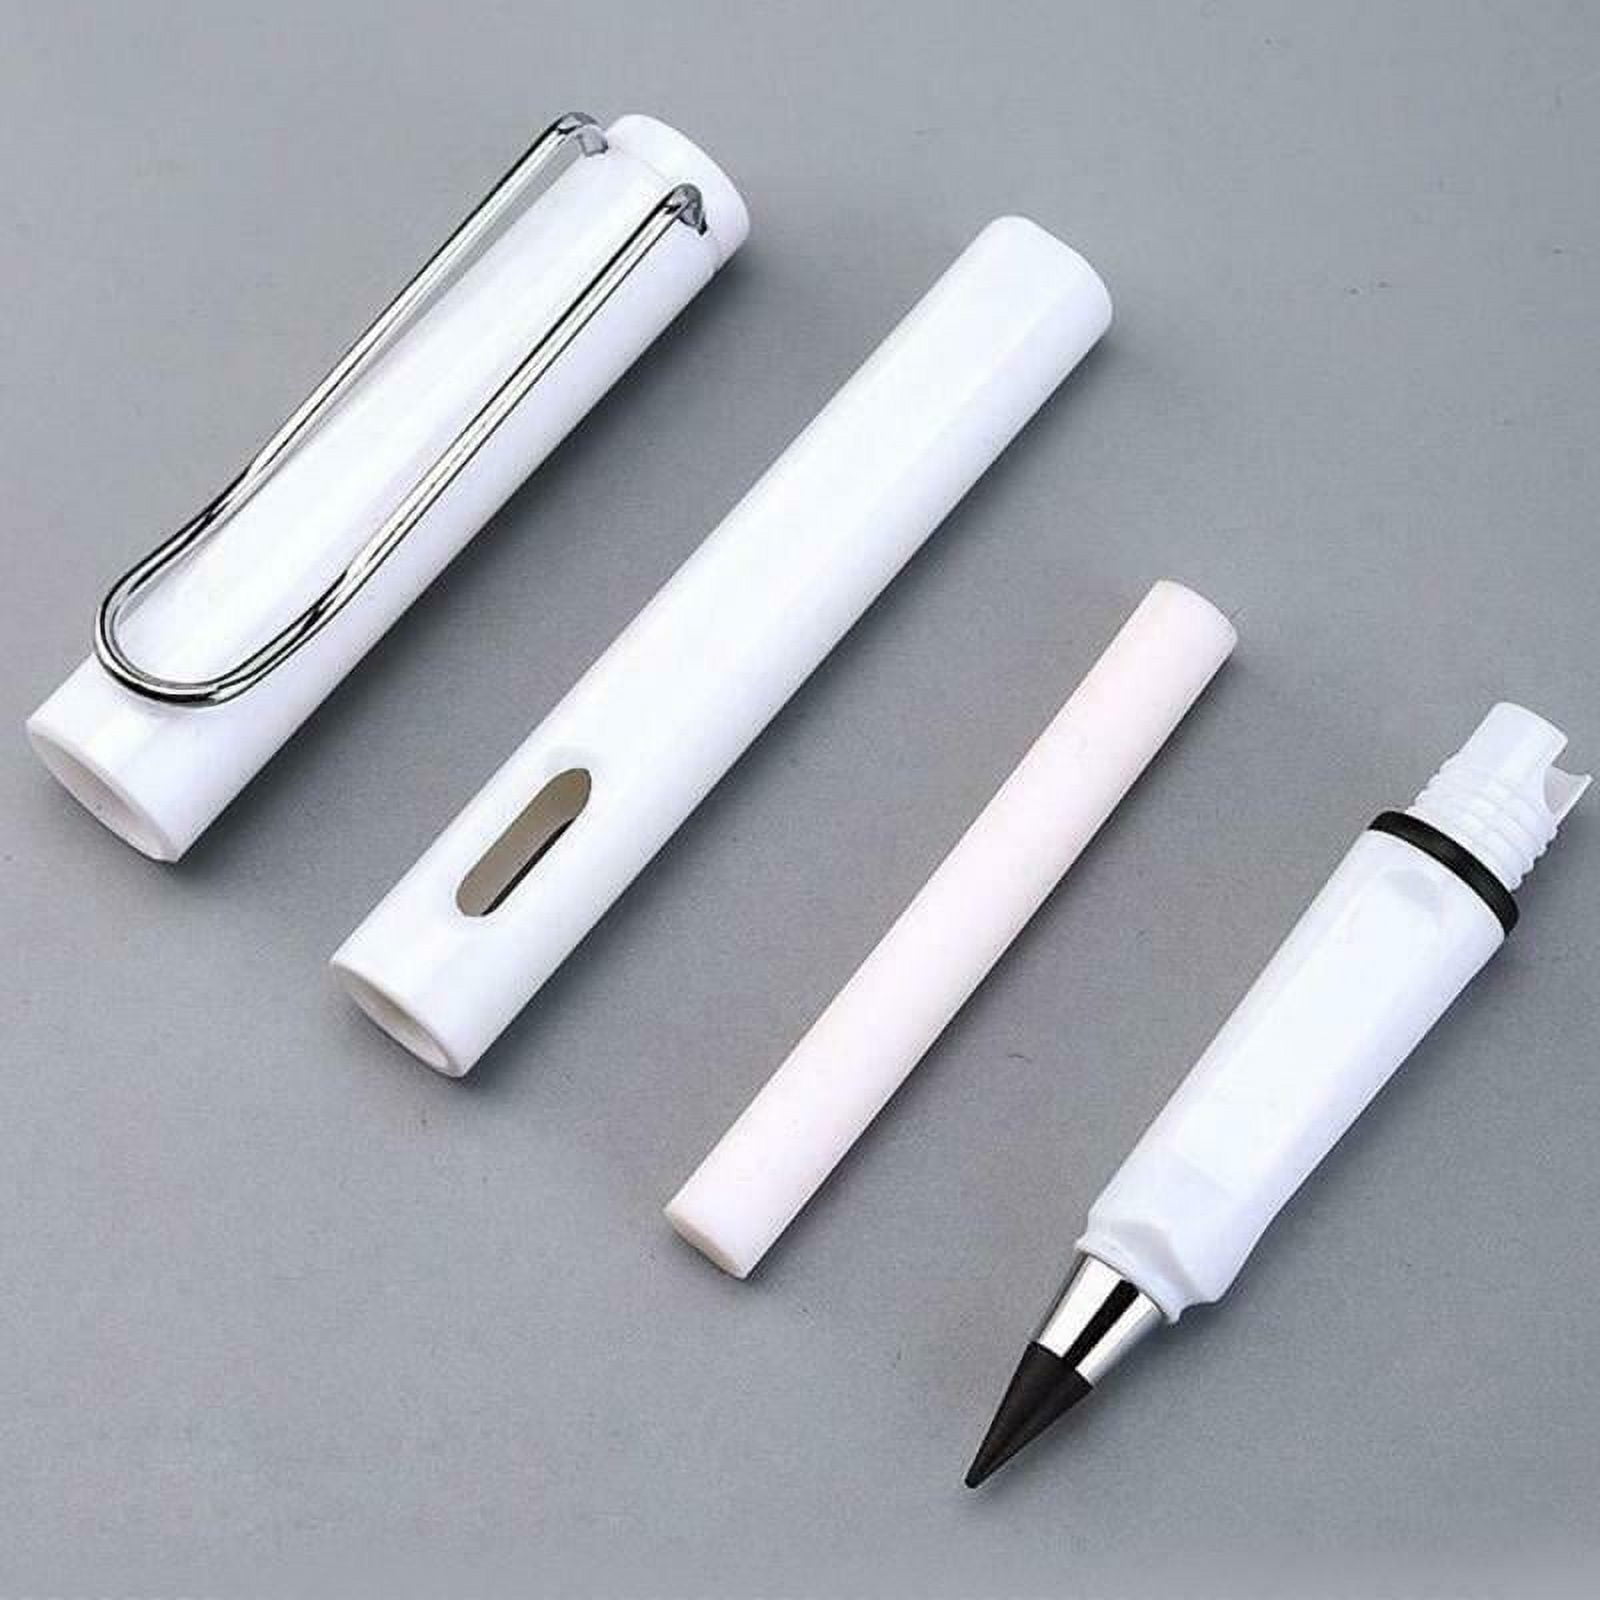 OIAGLH 5pcs Replaceable Nib Inkless Pencil Reusable Drawing With